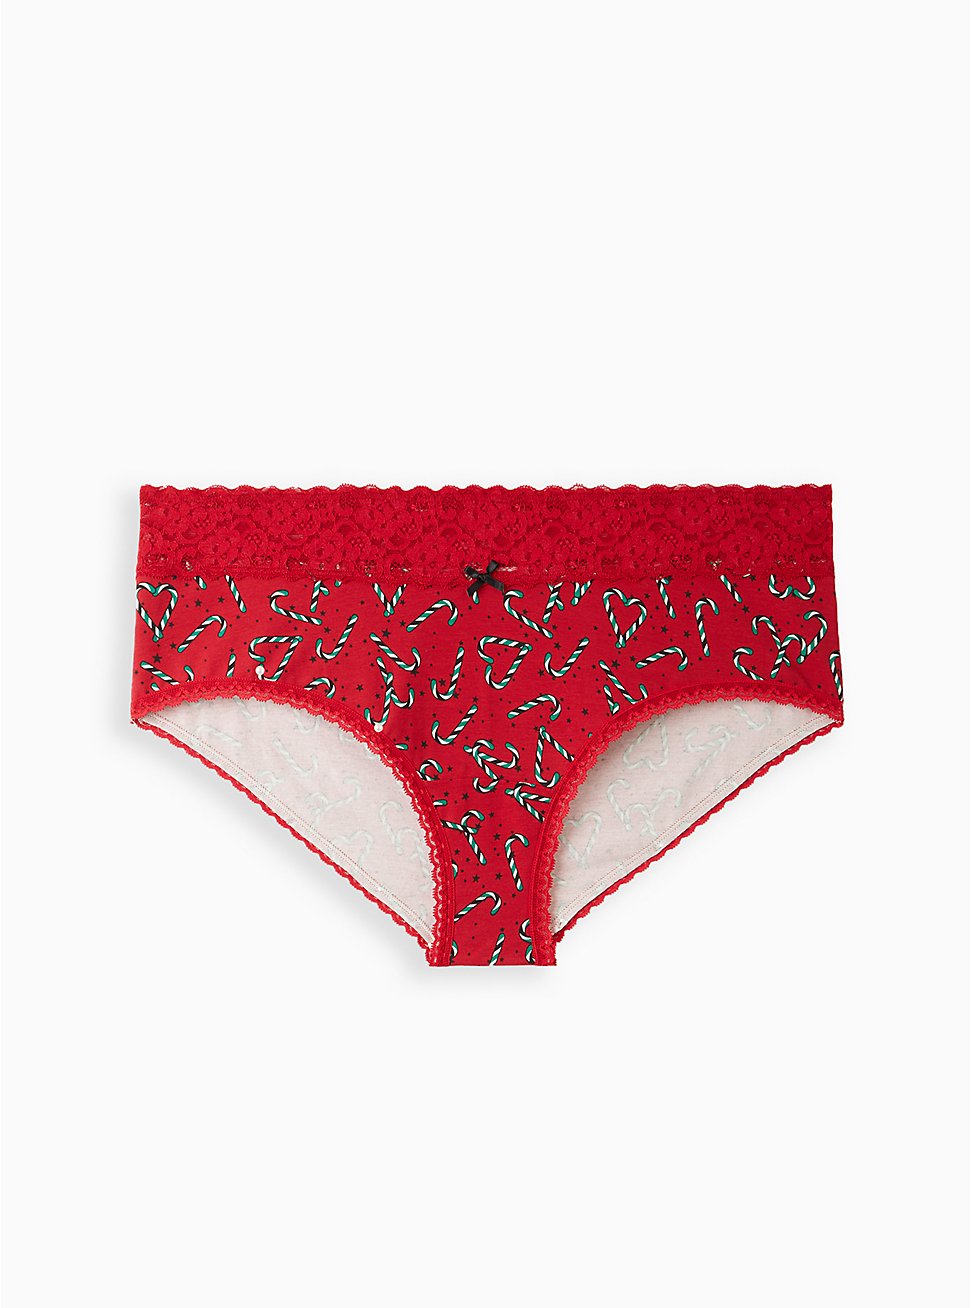 Wide Lace Trim Cheeky Panty - Cotton Candy Cane Red, , hi-res